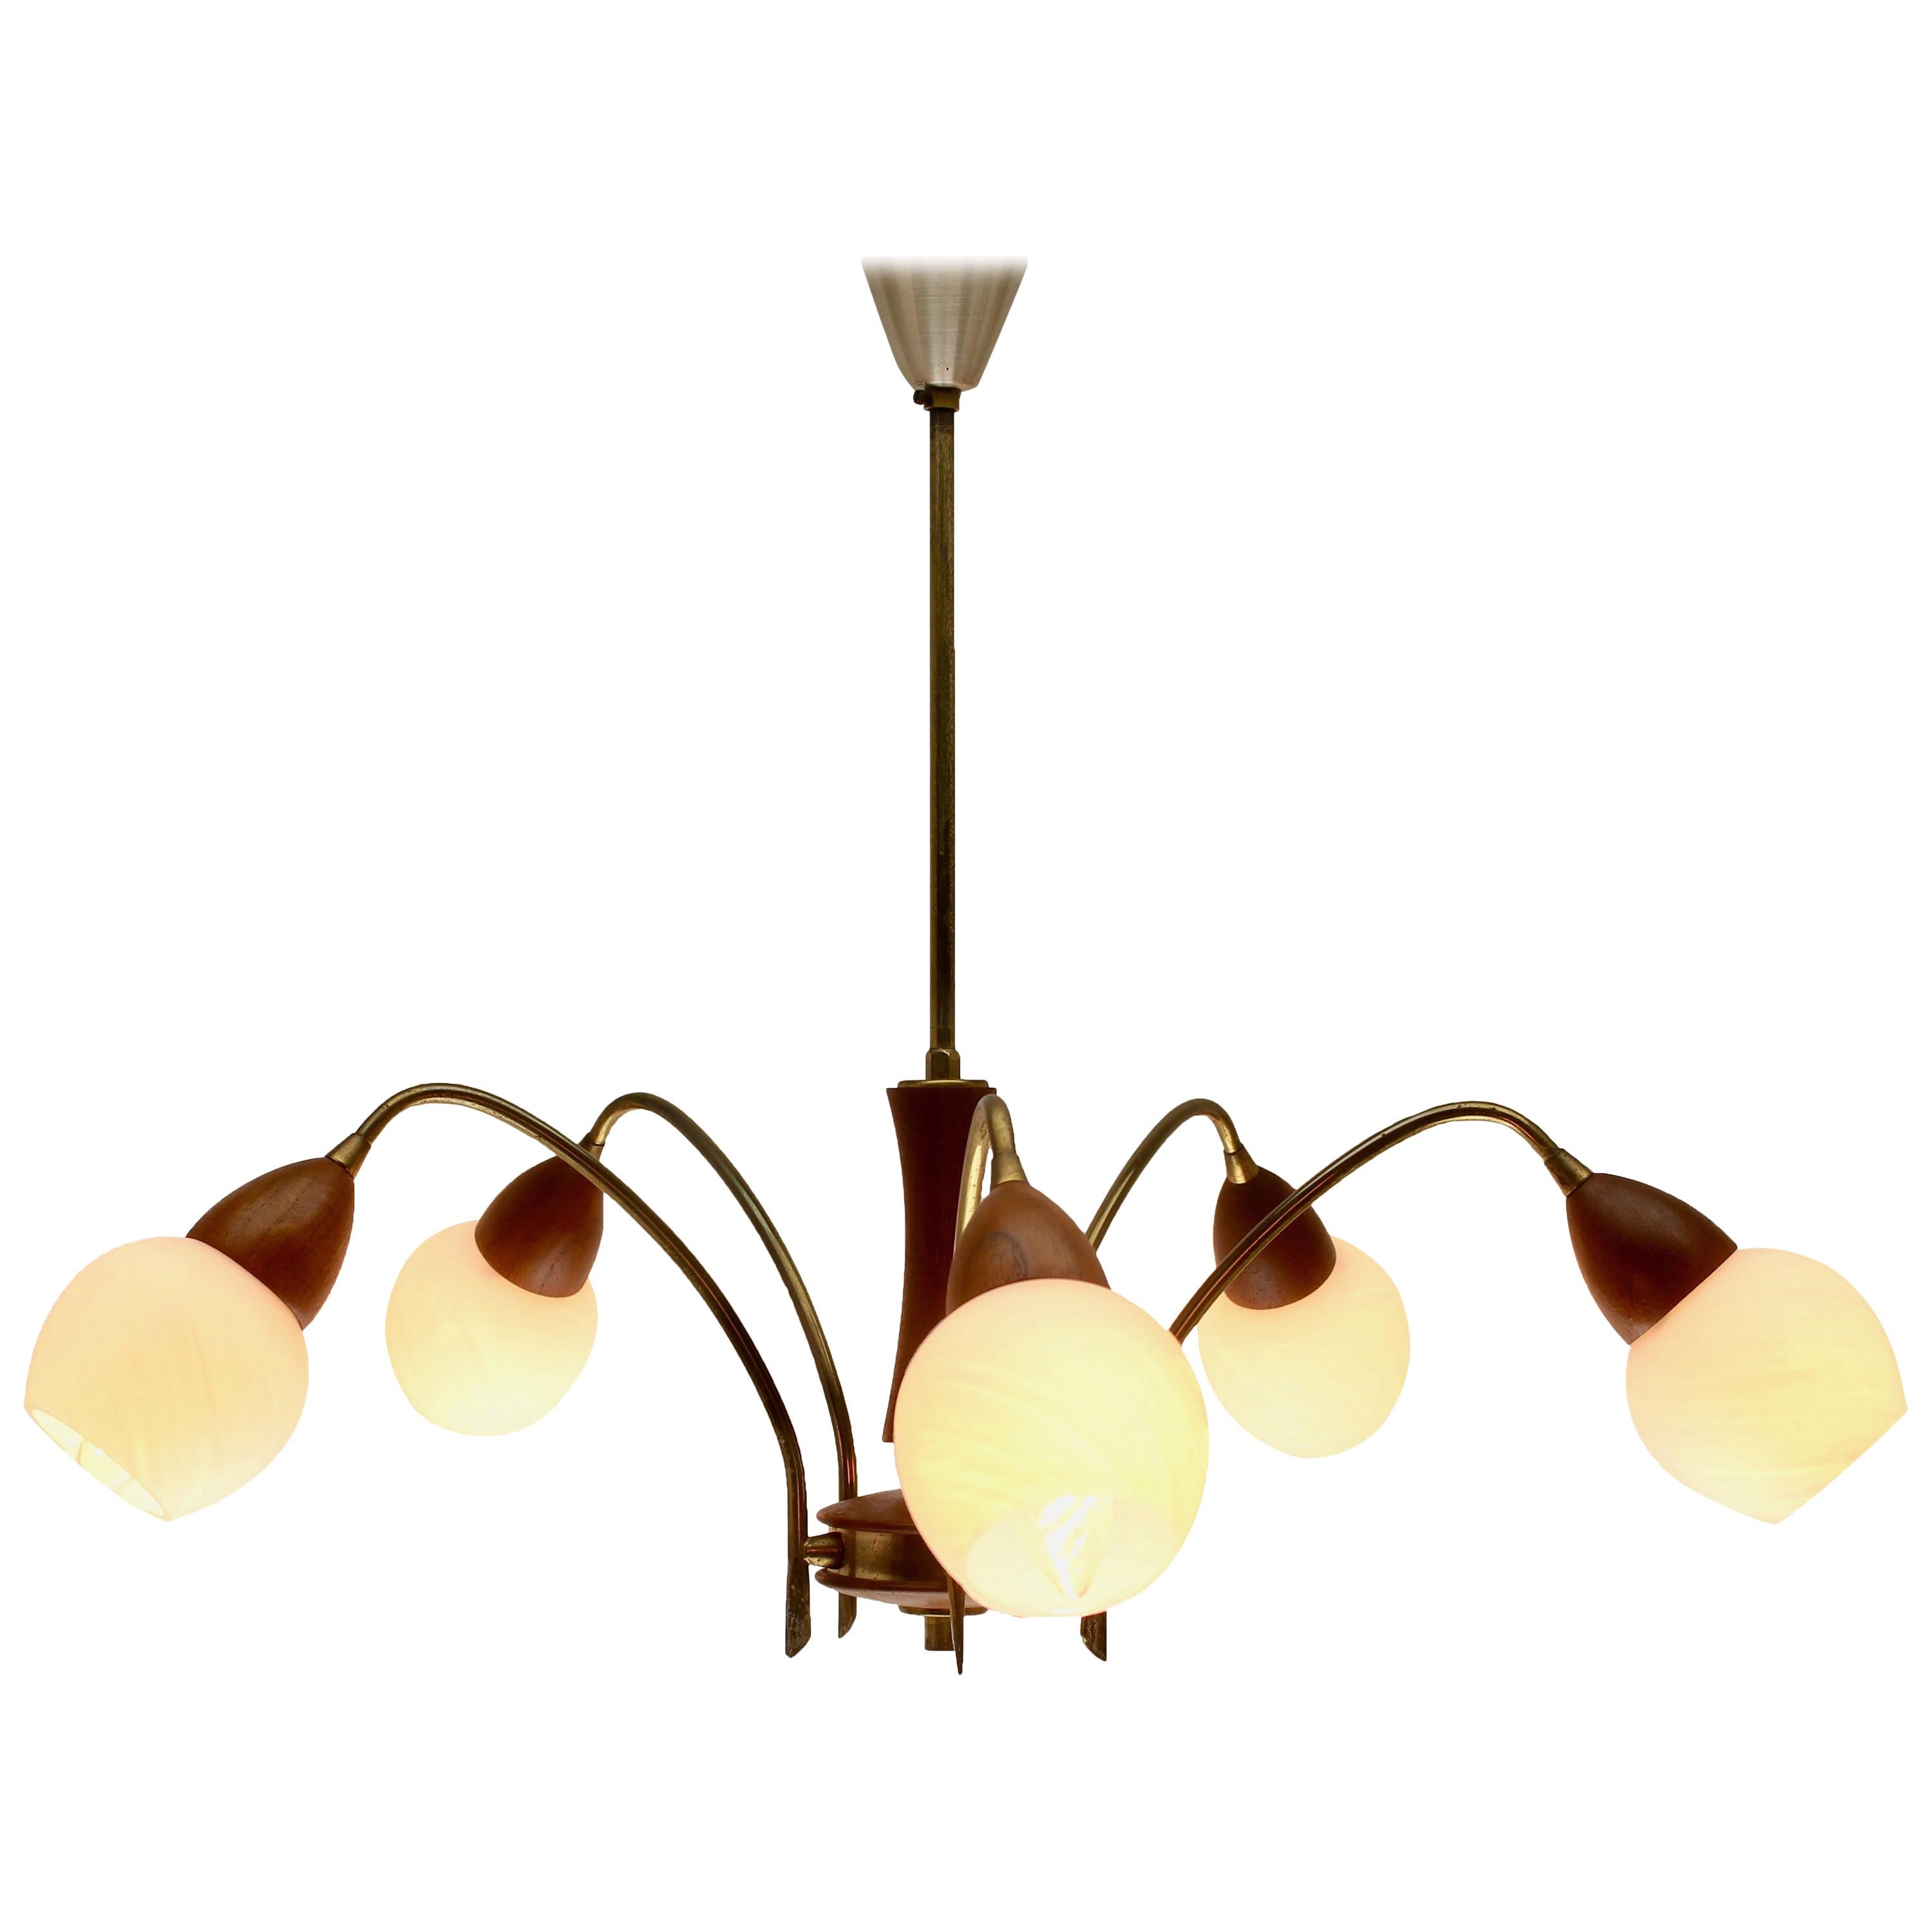 Vintage Chandelier Six Arms in the Style of Stilnovo, Brass and Wood, Italian